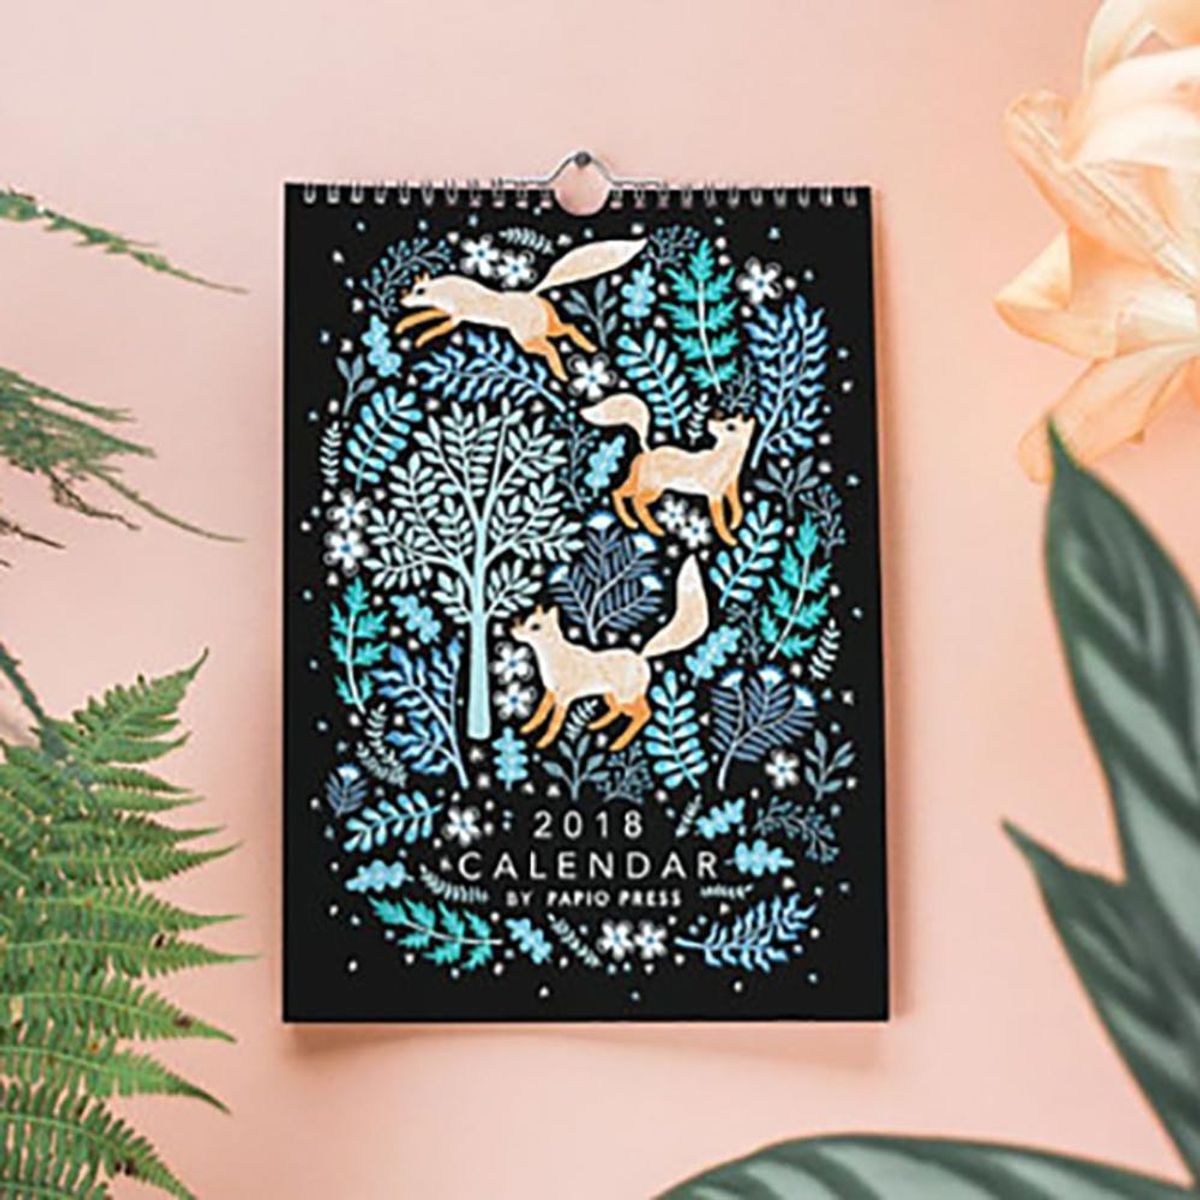 10 Etsy Stores to Shop If You Love Rifle Paper Co.